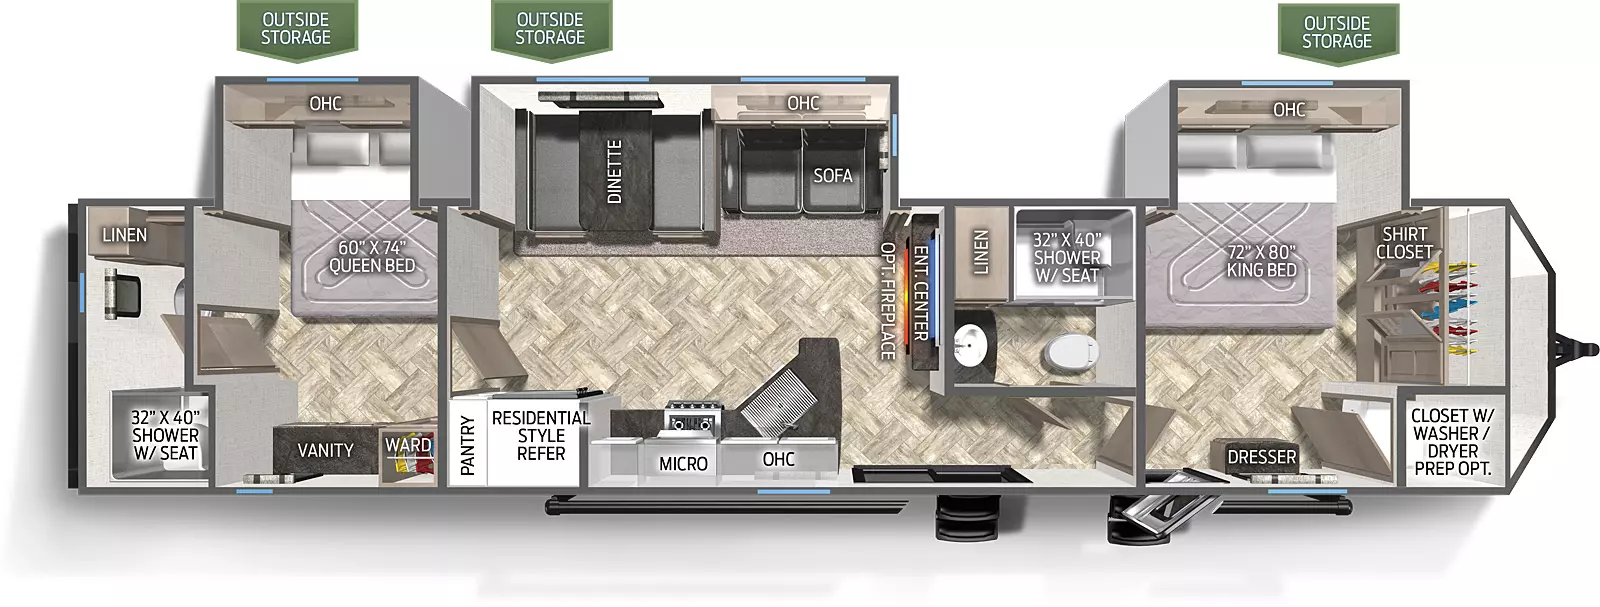 The 39DBT has three slide outs on the off door side. Exterior features include a 21 foot awning. Interior layout from the front to back: bedroom with closet that has washer dryer prep, slide out containing a king bed, dresser; full bathroom; entertainment center; off door slide out containing a three cushion sofa and booth dinette; kitchen with cooktop stove, microwave, residential refrigerator and pantry; second bedroom with slide out containing a queen bed, vanity and wardrobe; second full bathroom.